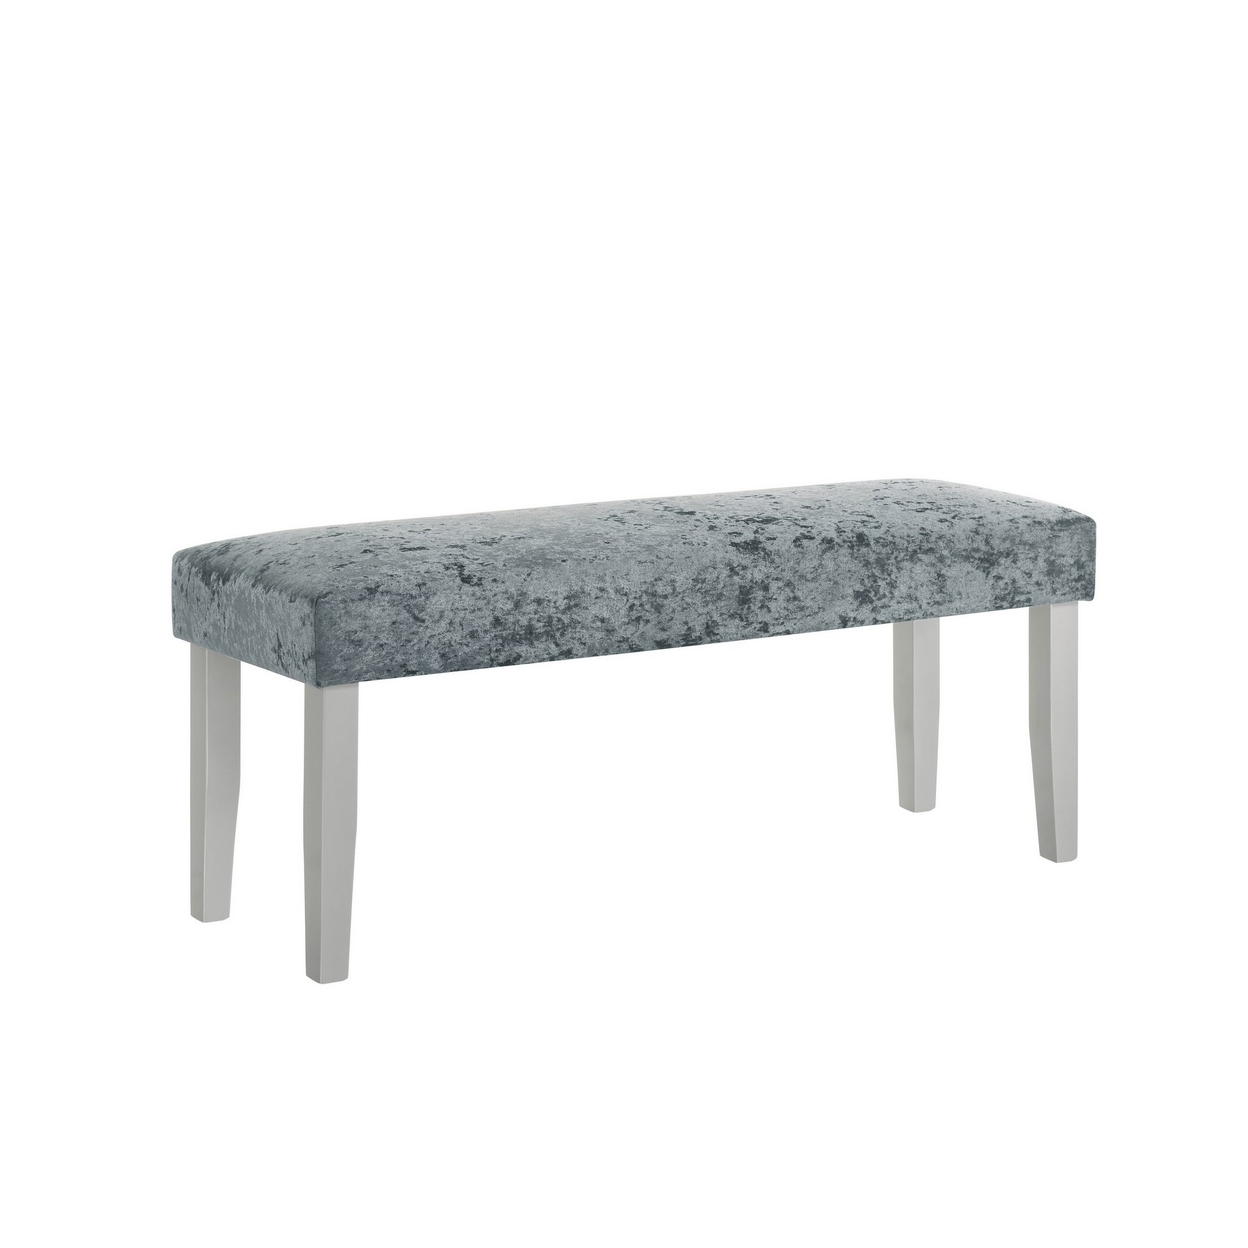 Liam 48 Inch Dining Bench, Wood, Cushioned Gray Fabric Upholstered Seat -Saltoro Sherpi